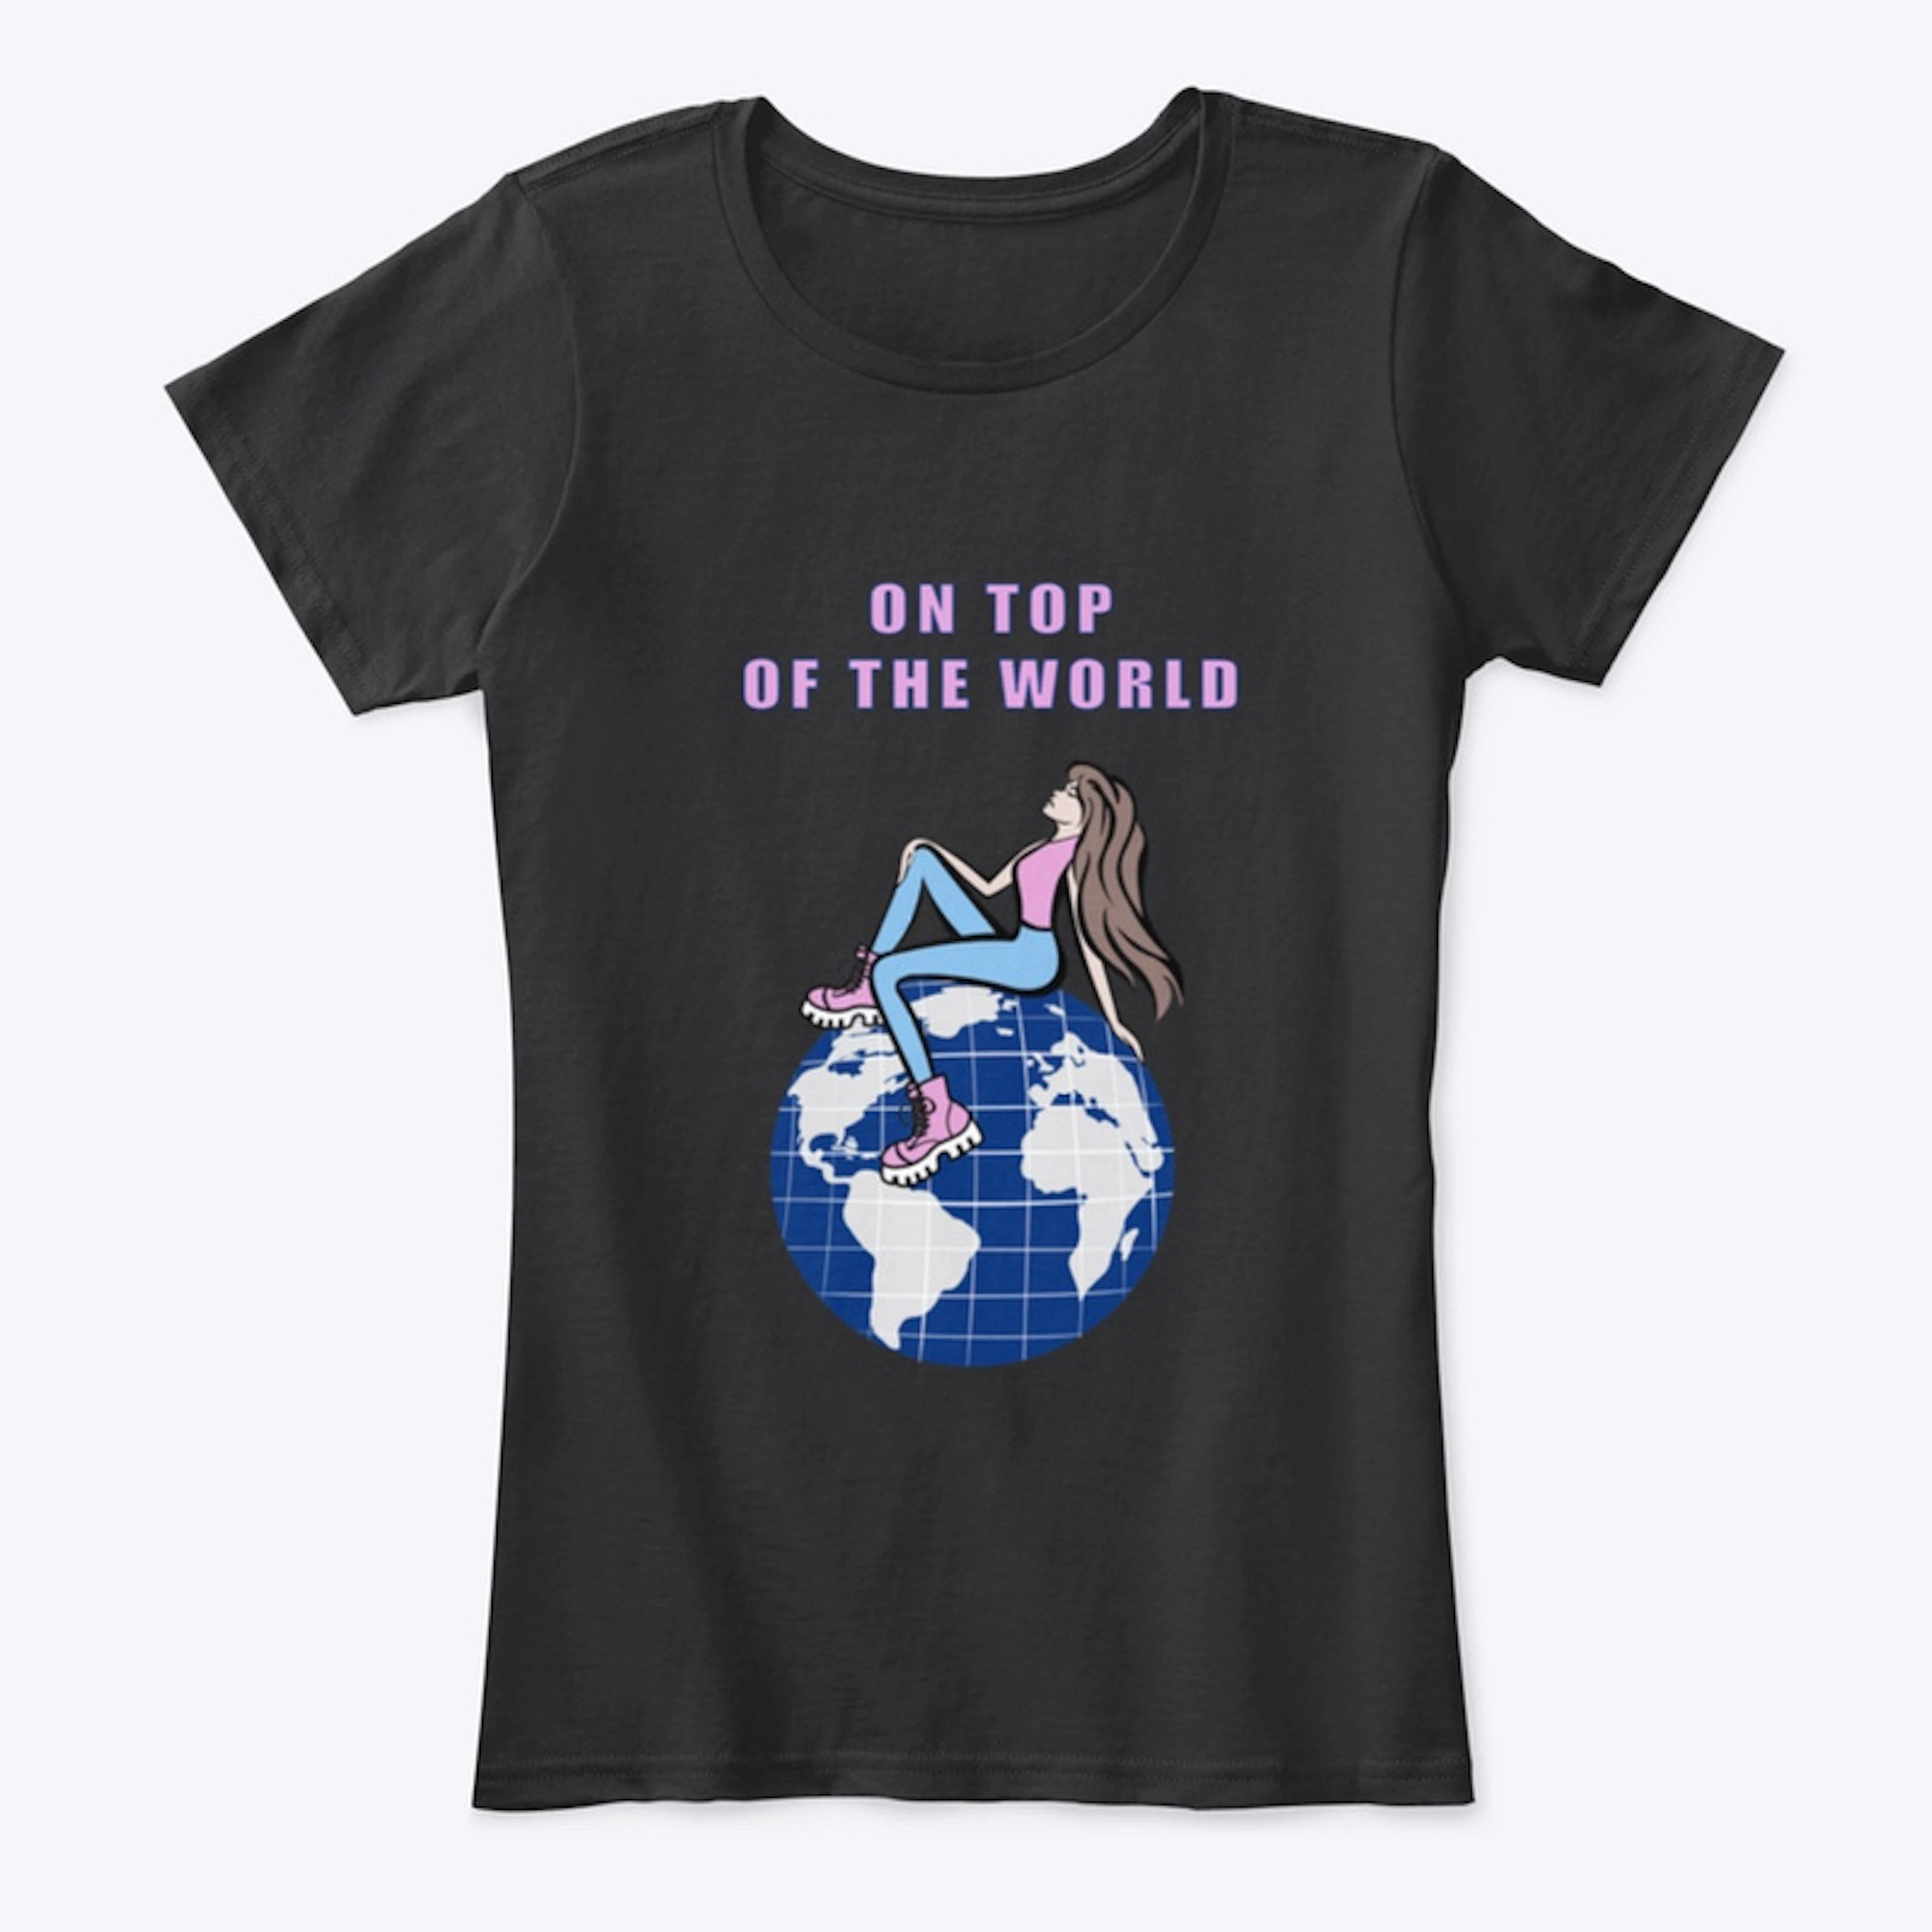 On top of the world women’s T-shirt